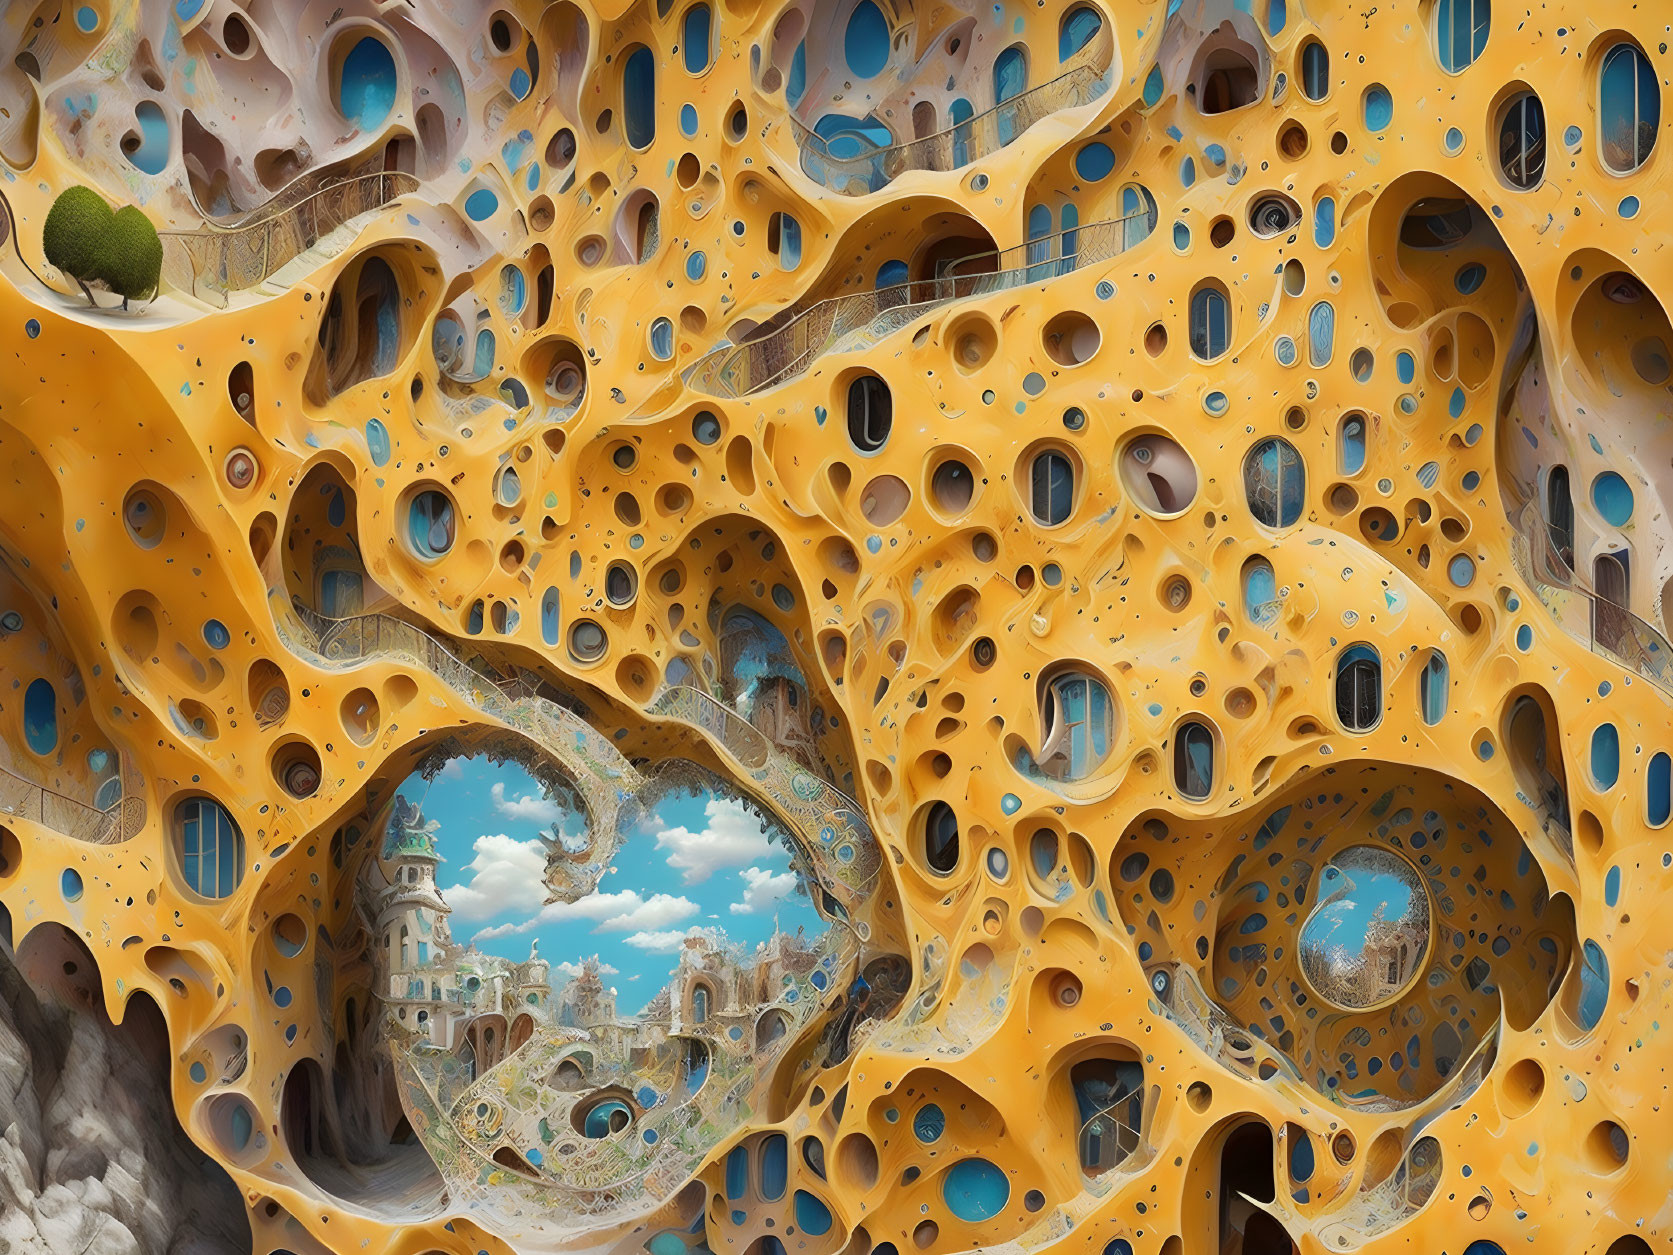 Surreal honeycomb-like structures with circular openings and distant architecture among rock formations